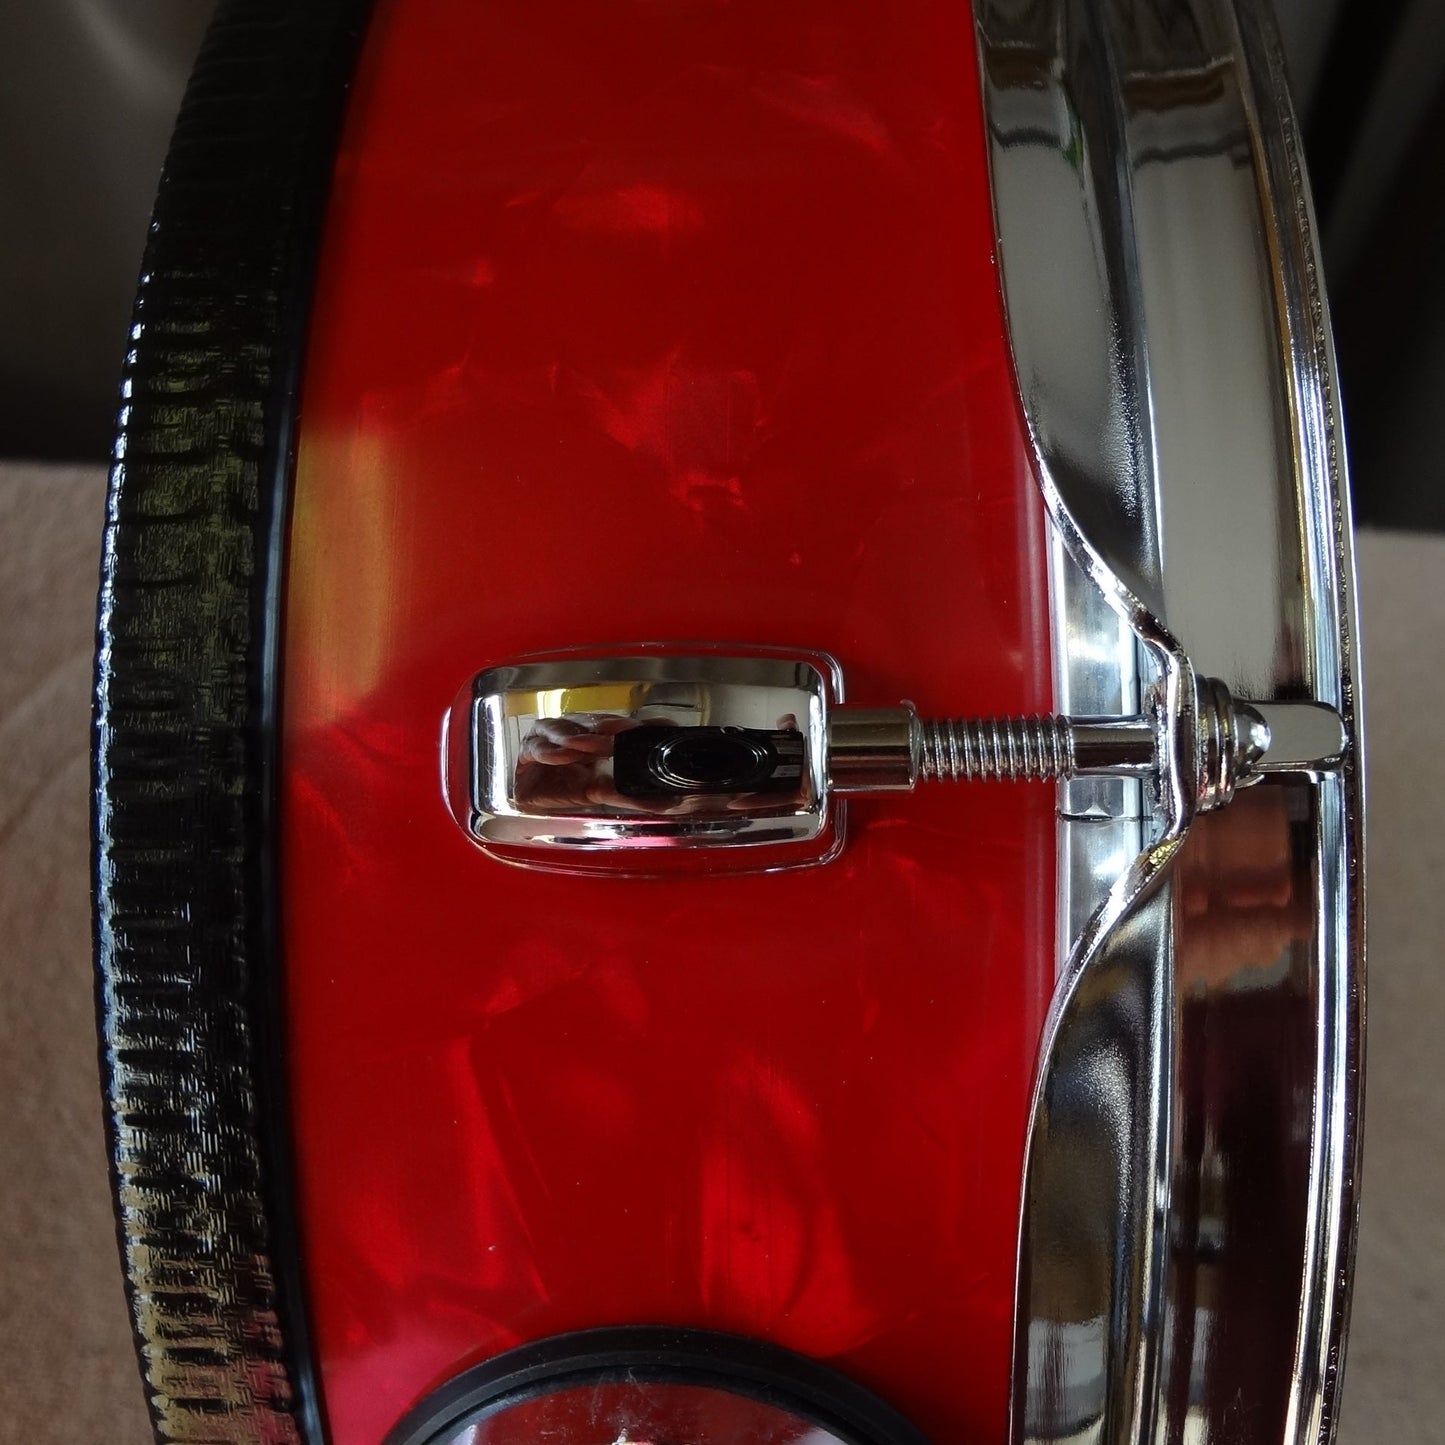 Refurbished 12 Inch Custom Built Electronic Snare Drum - Red Pearl